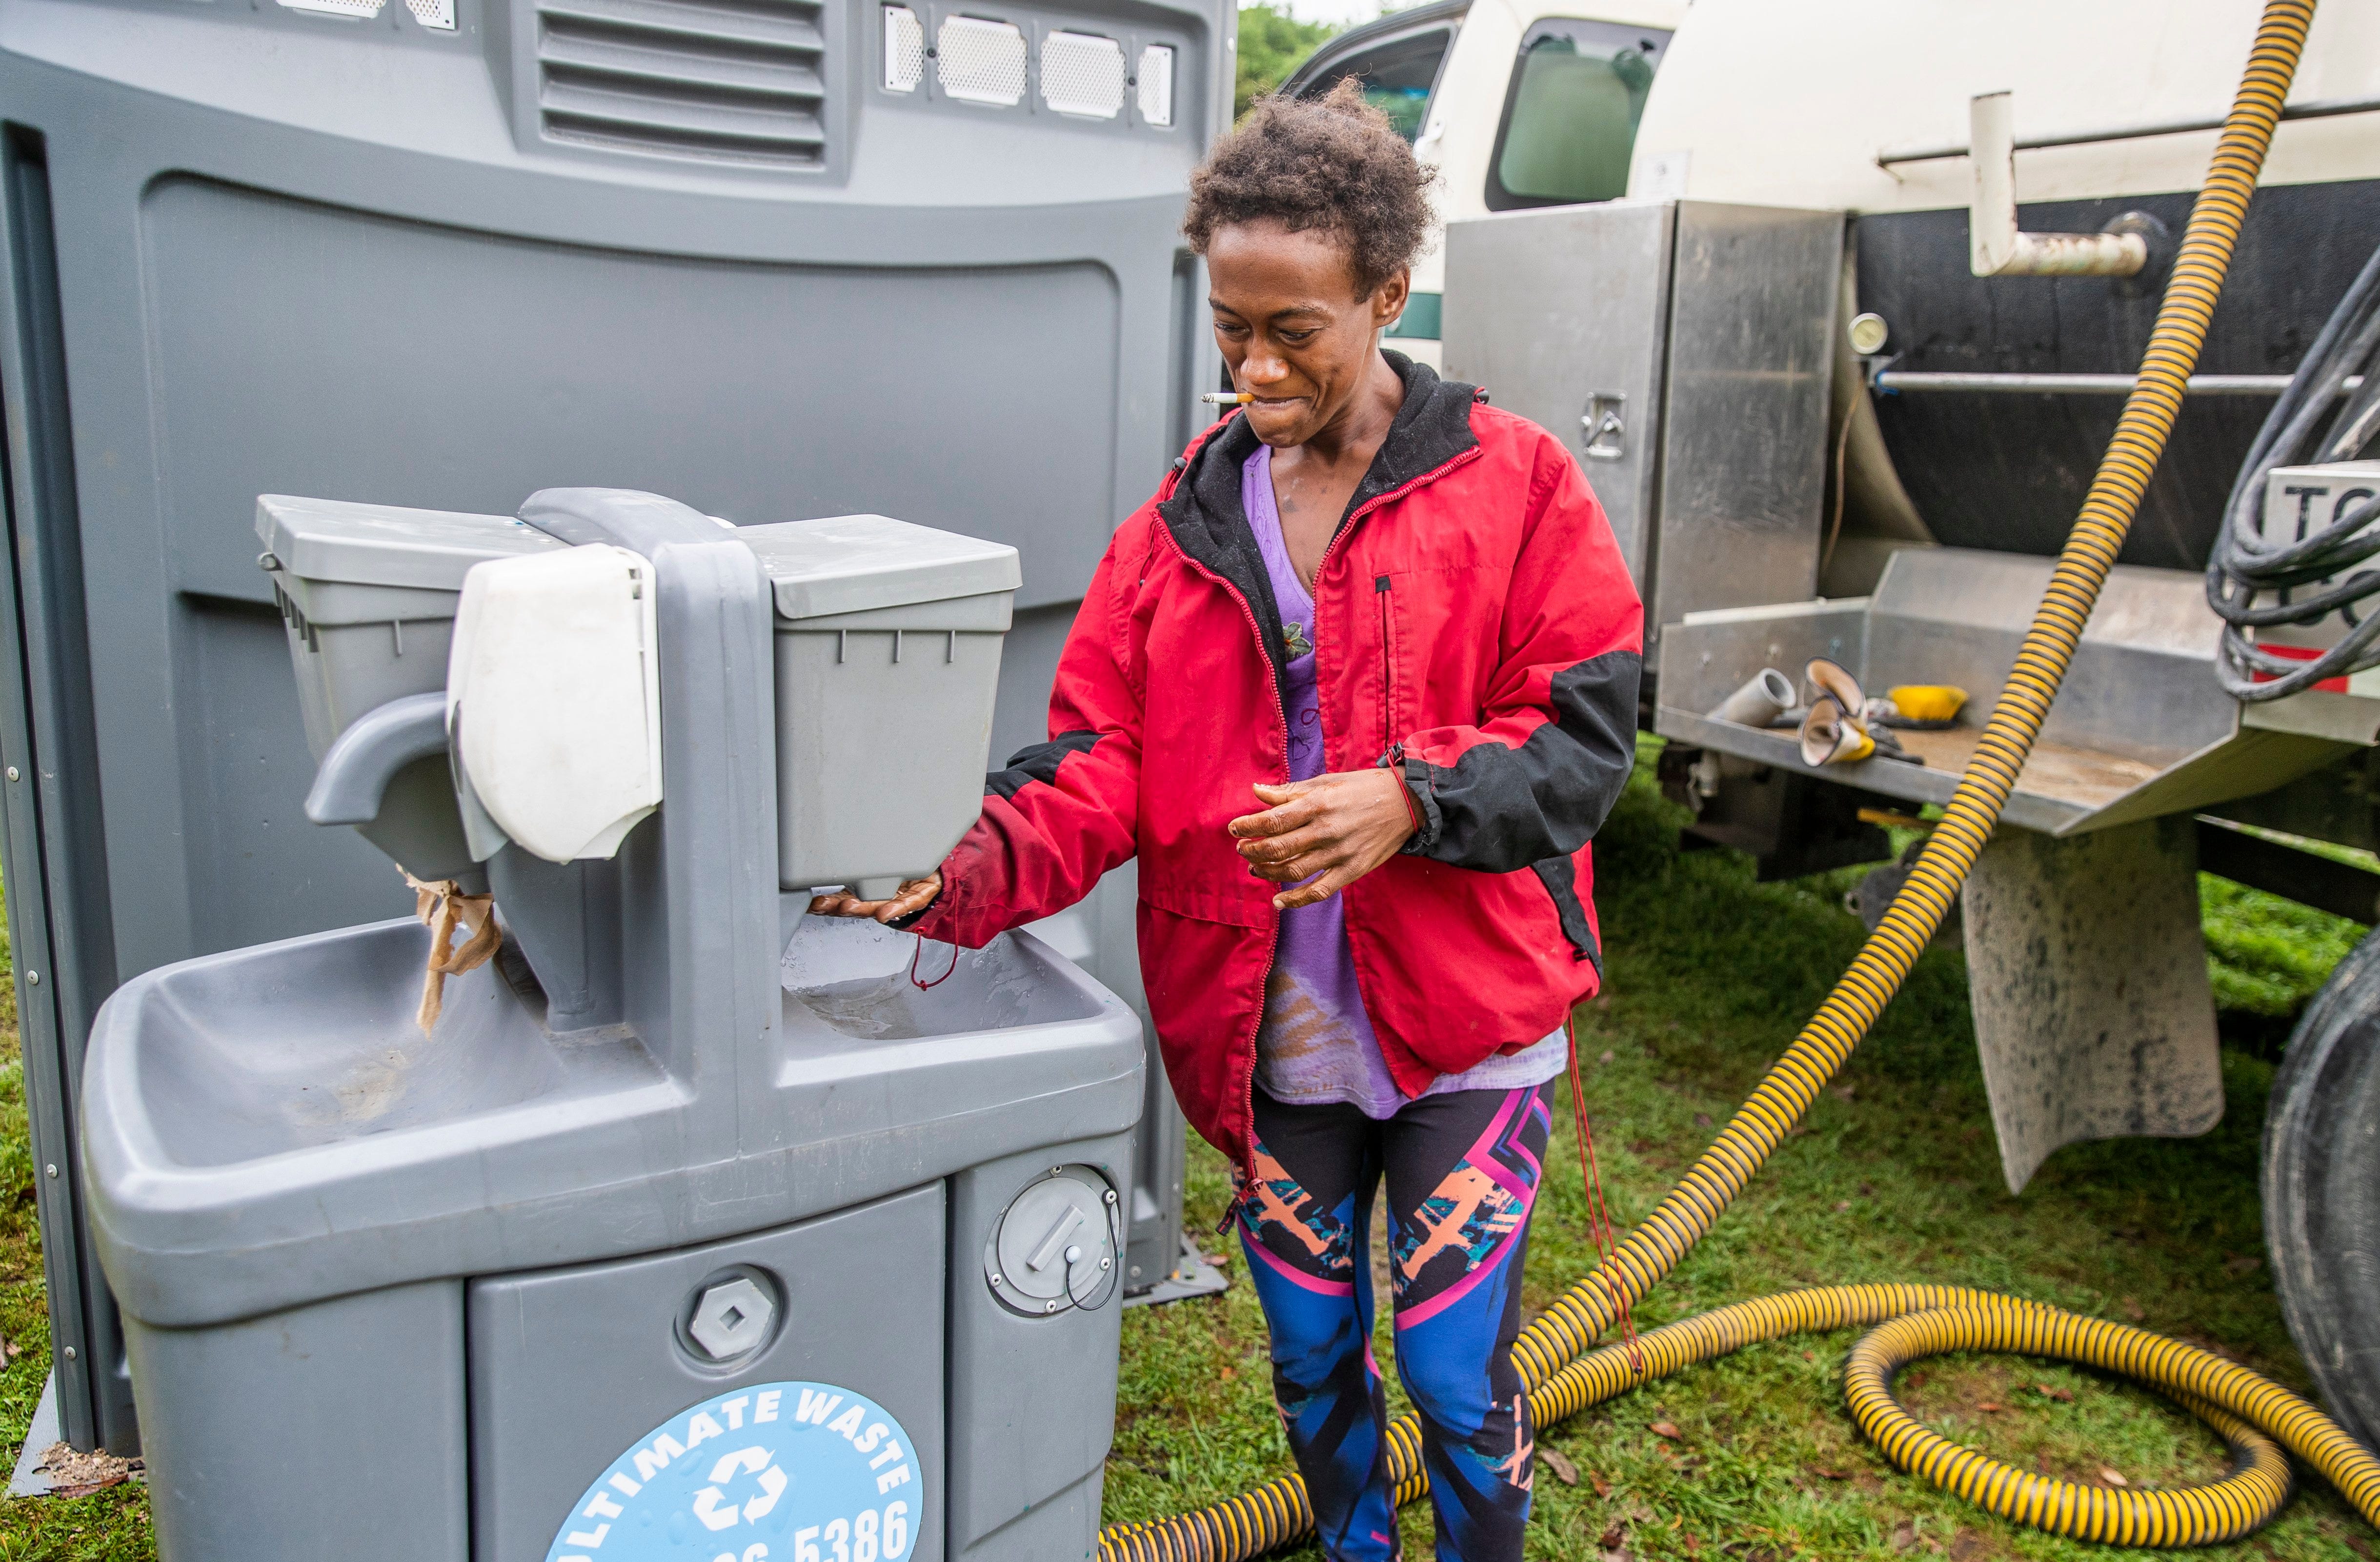 Levon Shyrell washes her hands at a portable station on at Riverside Dr, Austin  Tuesday, March 31, 2020. Texas Disposal Systems team up with the City of Austin to provide hand washing and portable restroom station for the Homeless around Austin. officials have leased a hotel to isolate people who are homeless who test positive for the coronavirus. City staff have also outlined a broad plan to educate the homeless community about the virus, while providing locations to shower, use bathrooms and sanitize to the best of their ability Tuesday, March 31, 2020